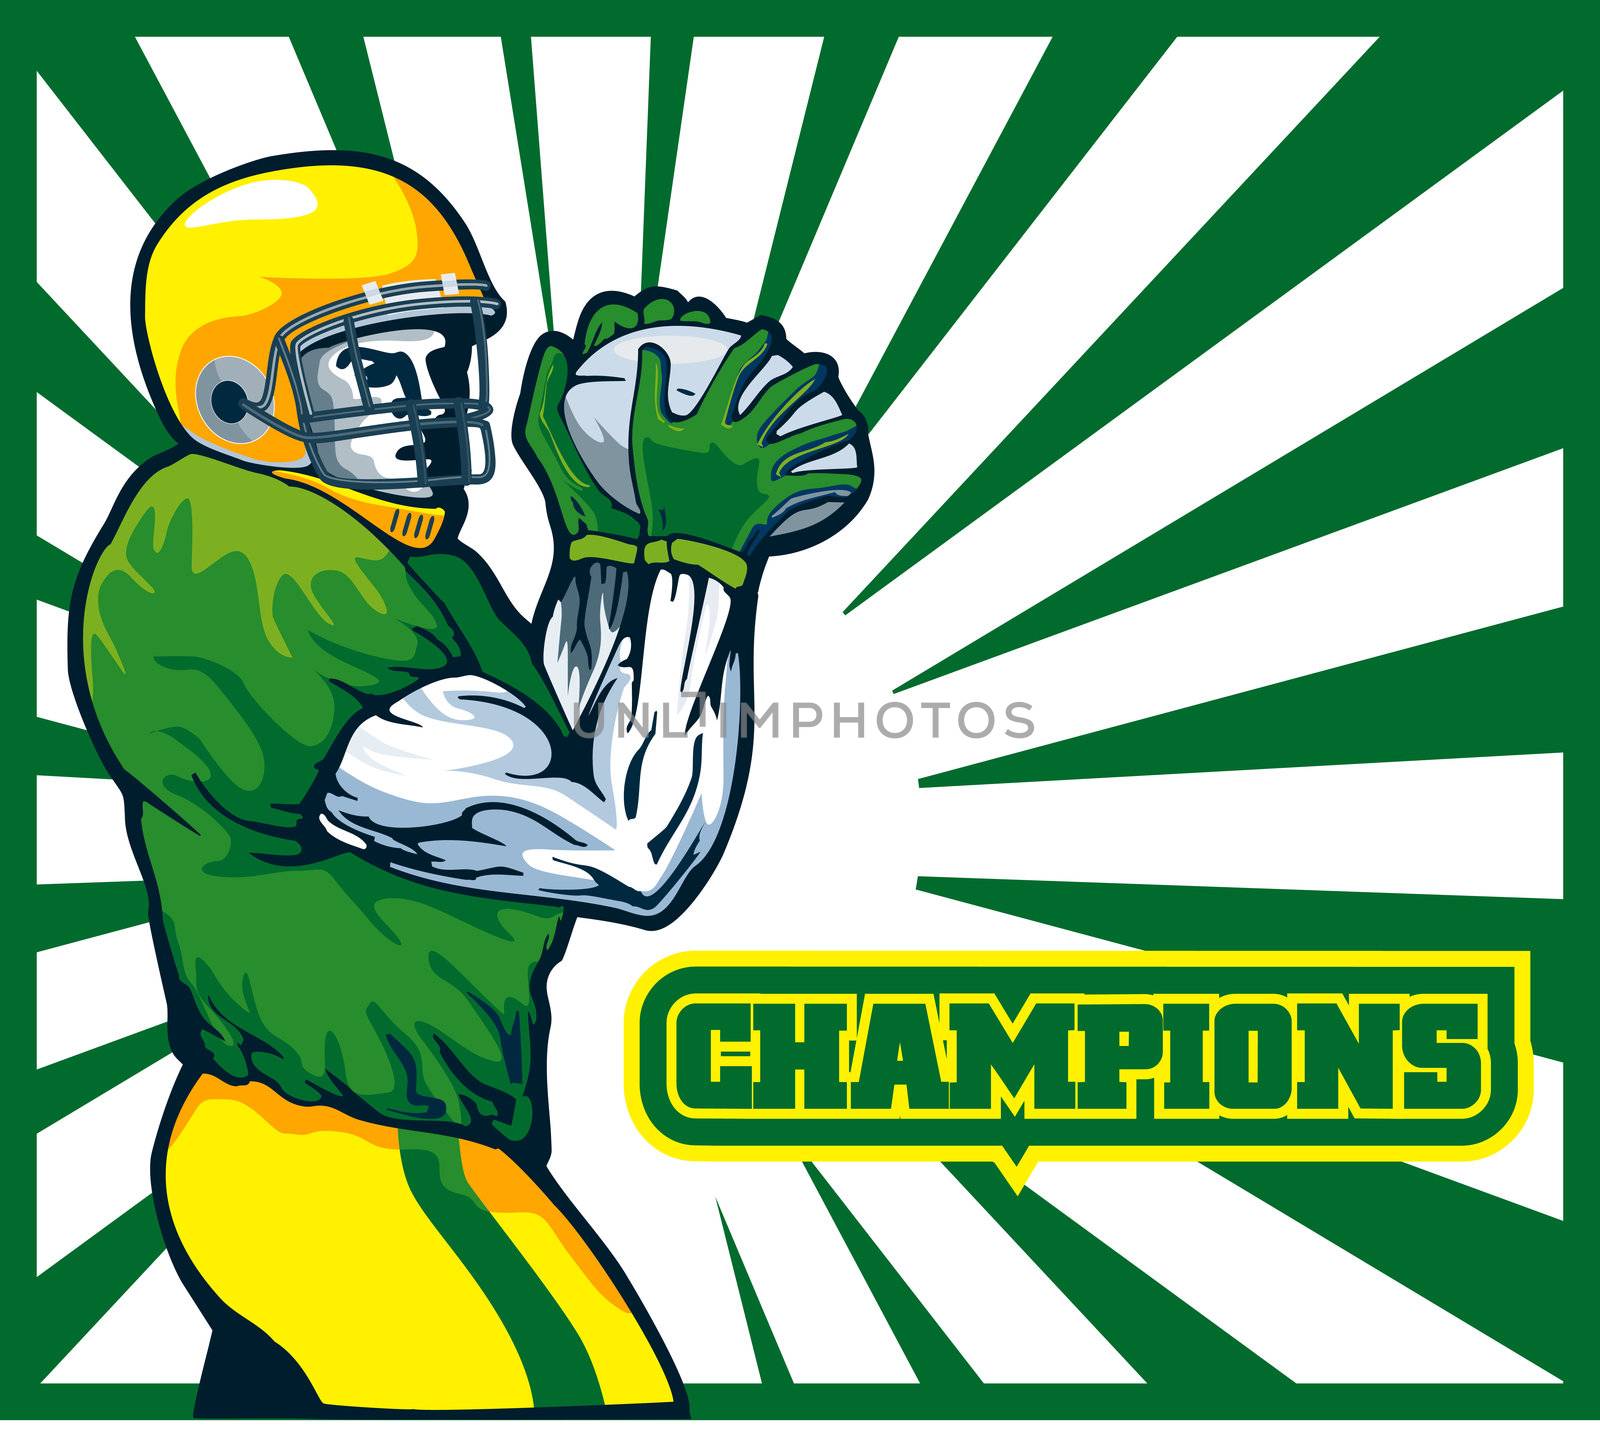 Illustration of an American football player quarterback about to throw winning pass with words "champions"